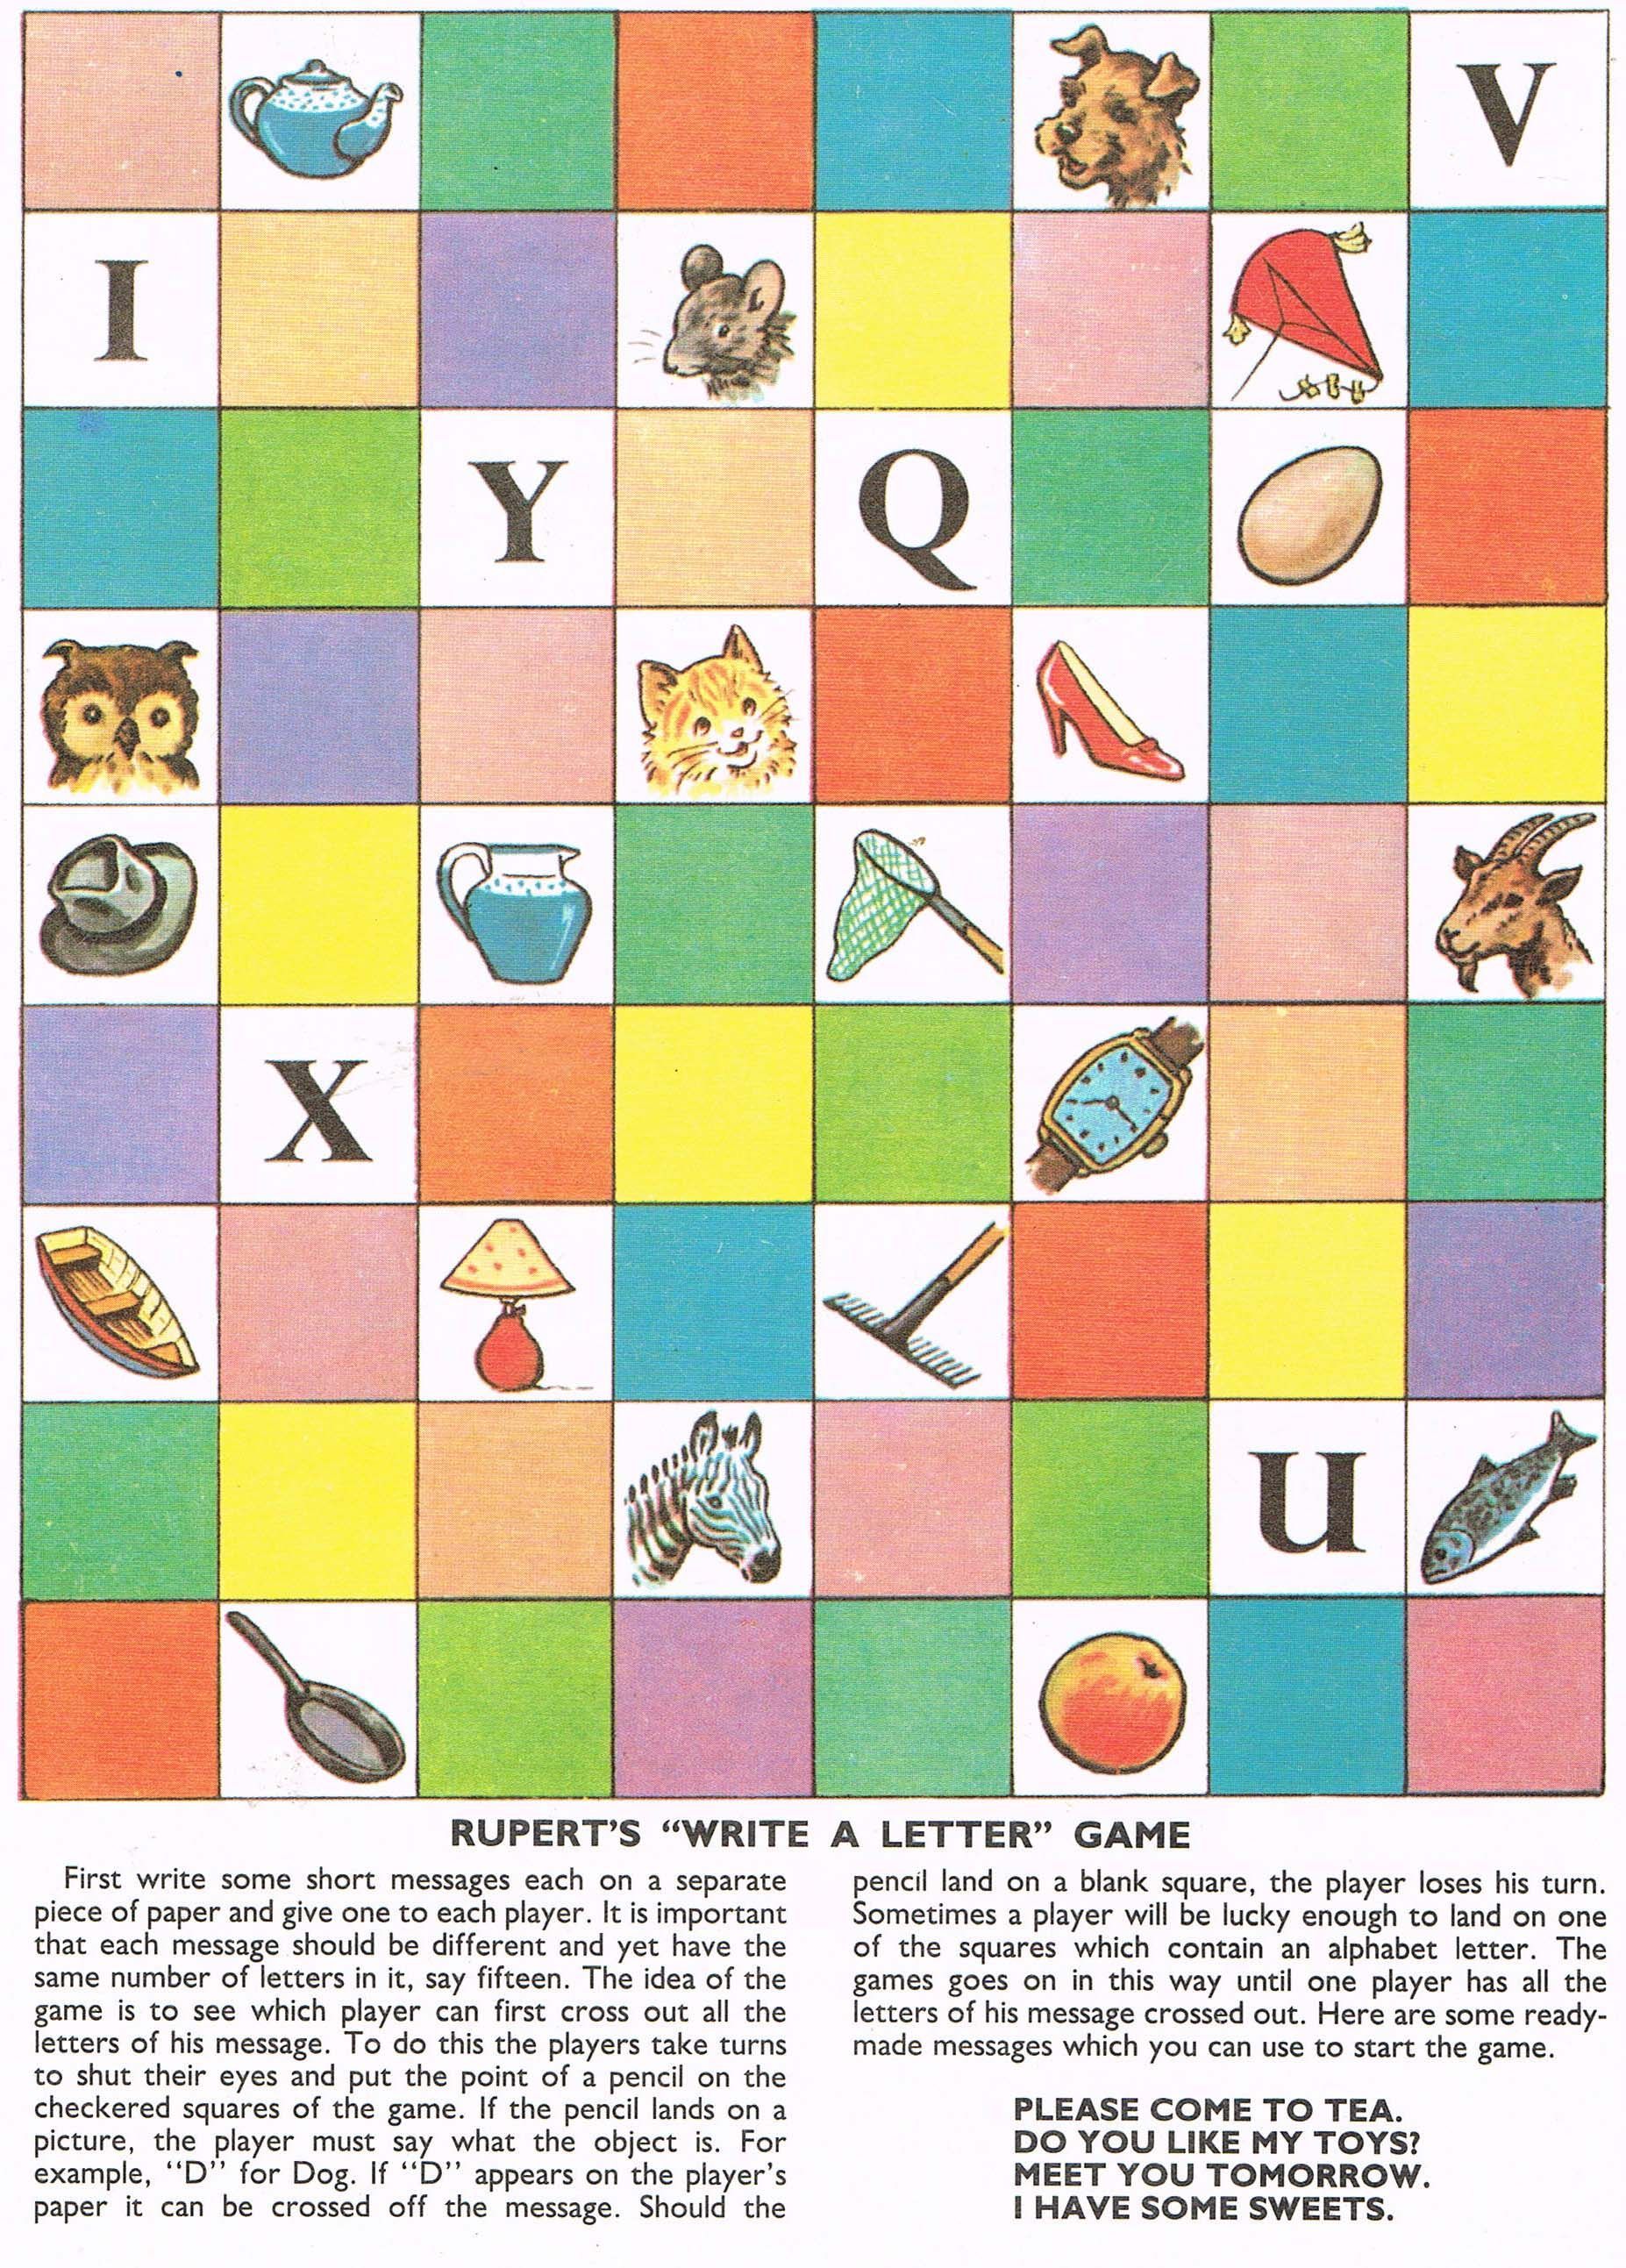 Rupert's "Write a Letter" Game